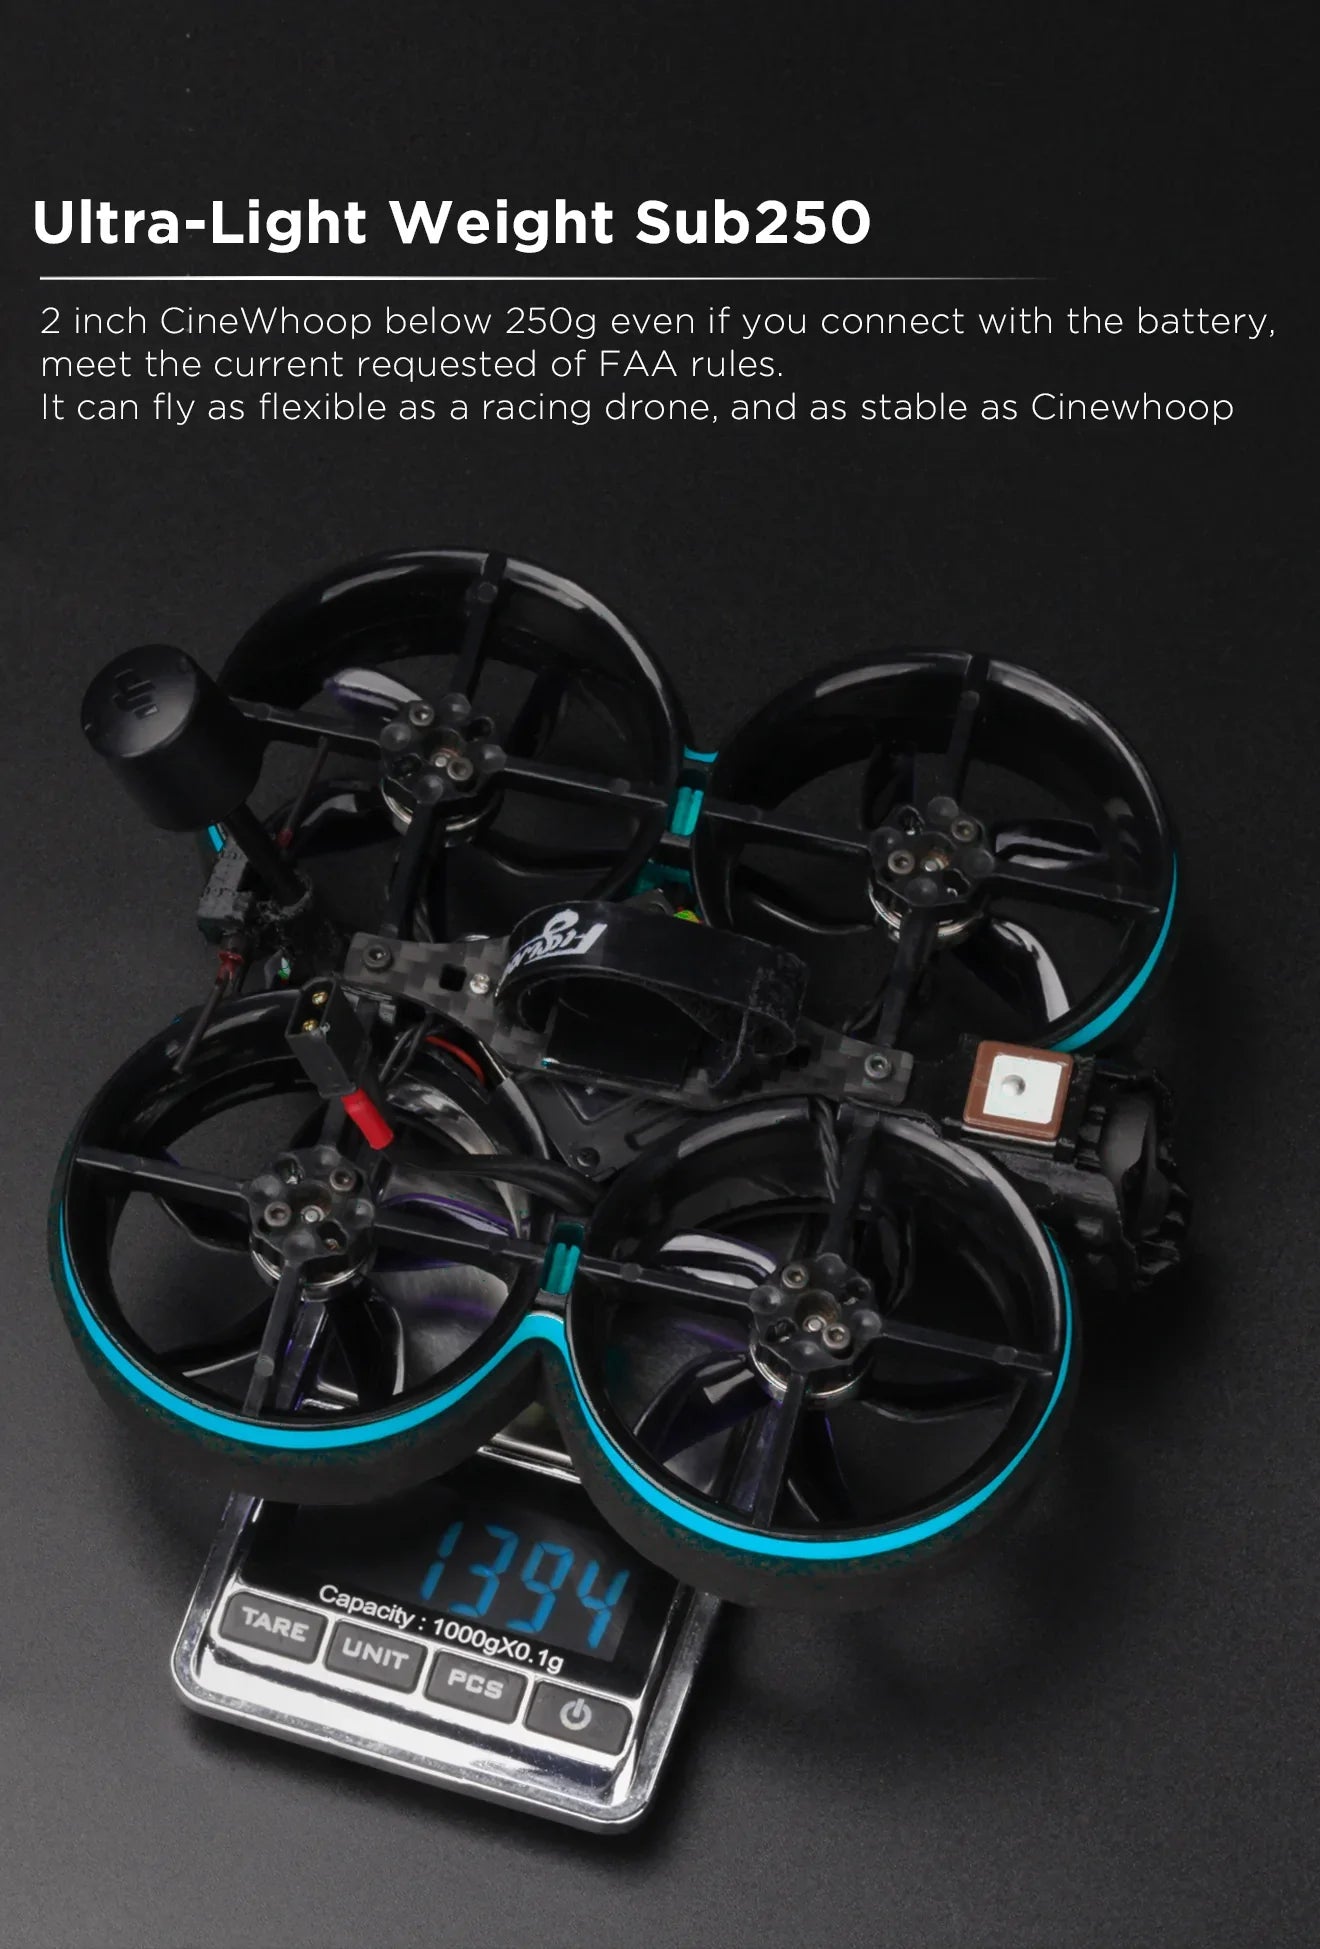 Cinewhoop can as flexible as a racing drone, and as stable as 1g